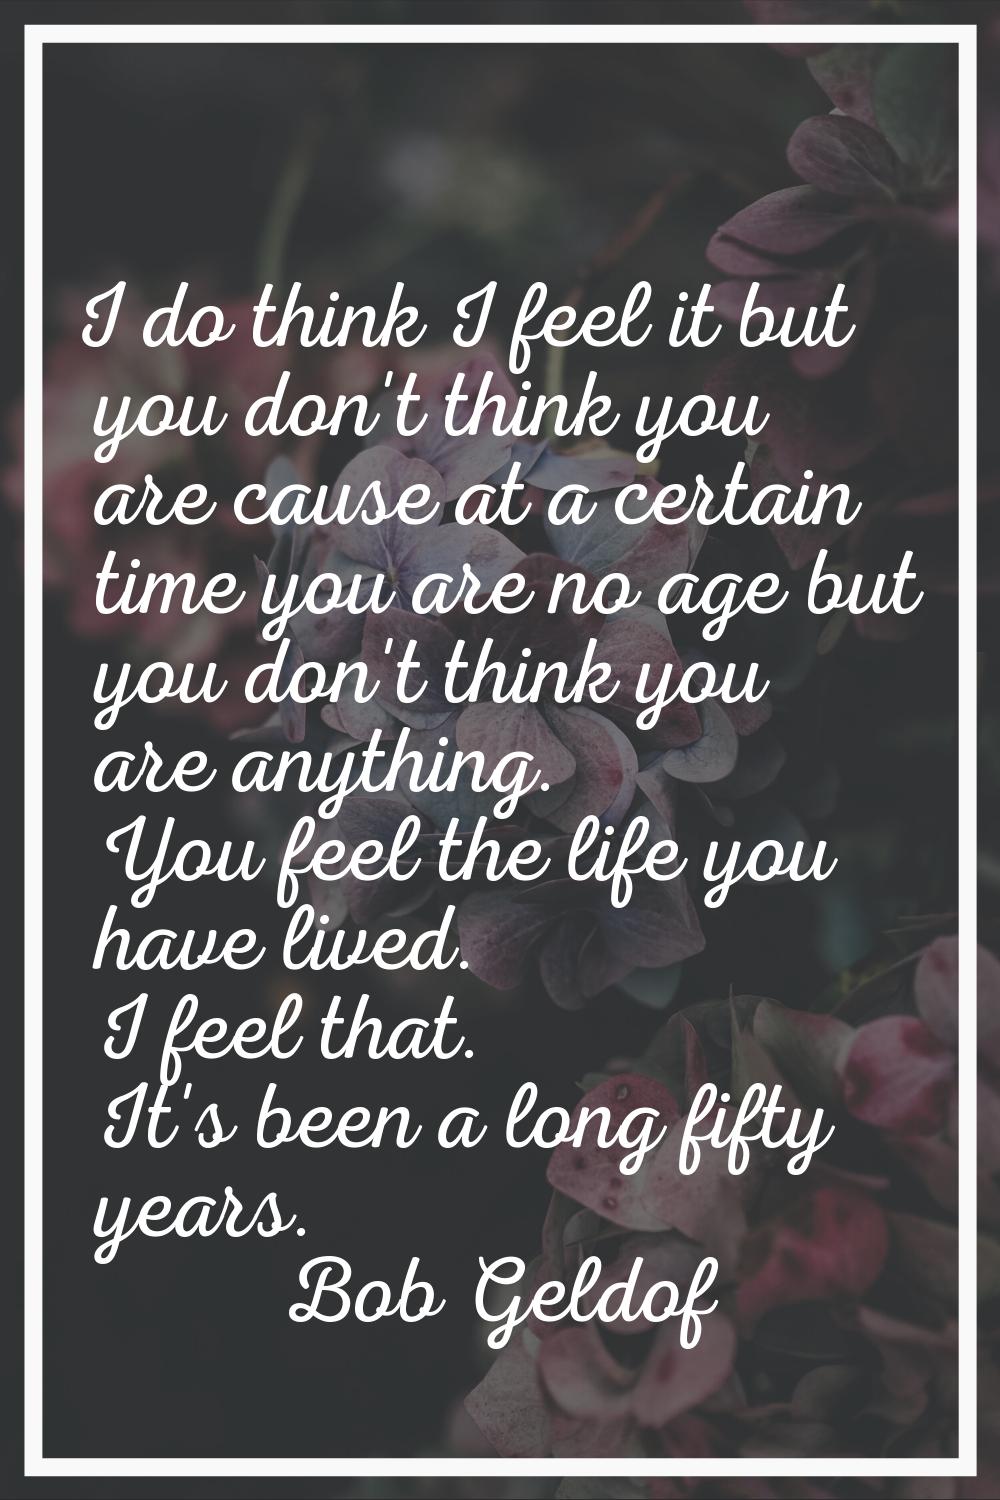 I do think I feel it but you don't think you are cause at a certain time you are no age but you don